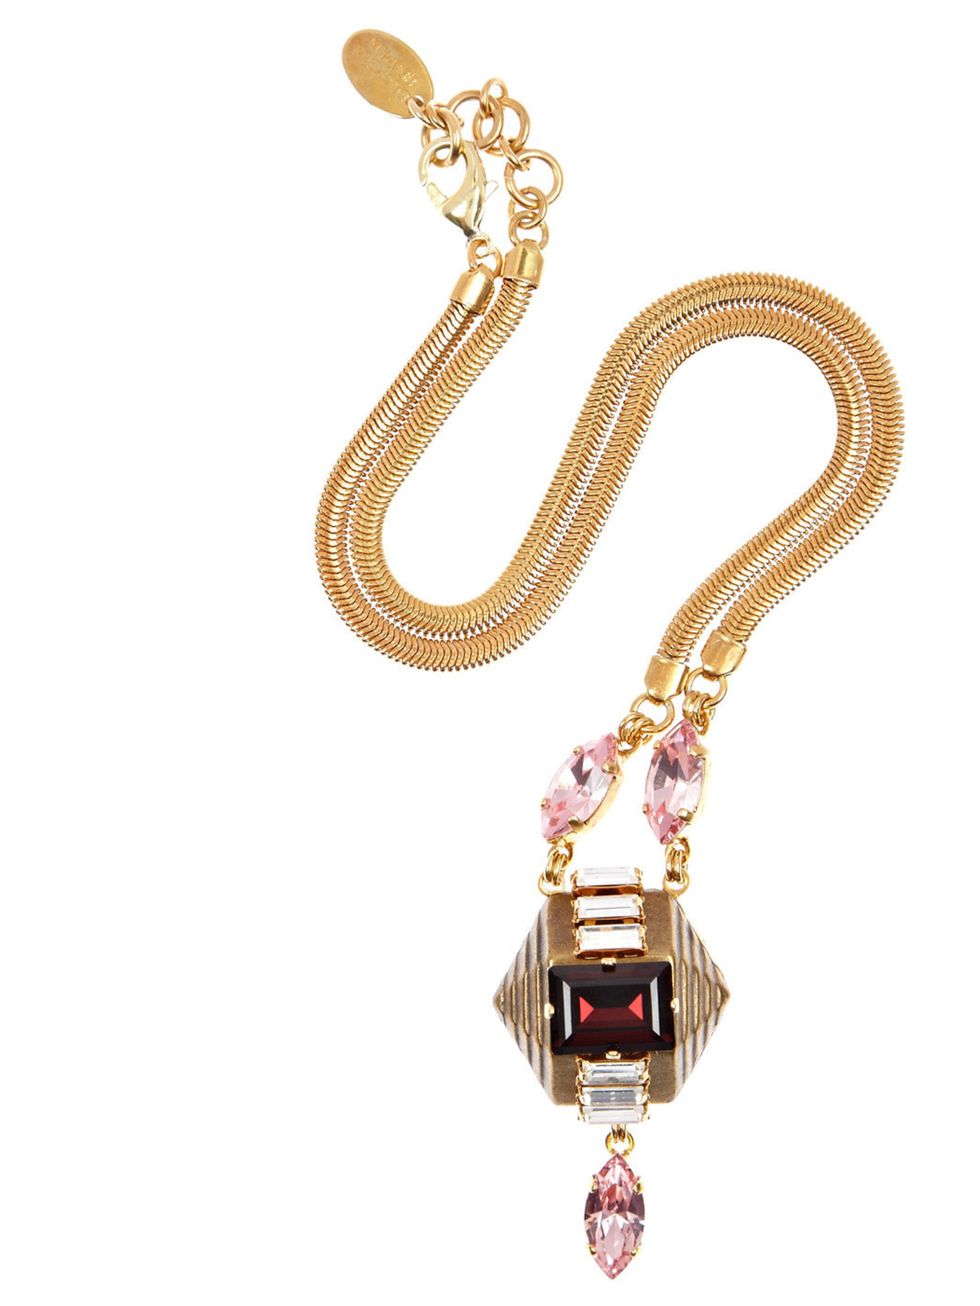 <p>Exclusive long gold pendant, £195 at <a href="http://www.theoutnet.com/">www.theoutnet.com</a></p><p>Available from Monday 5th November </p>